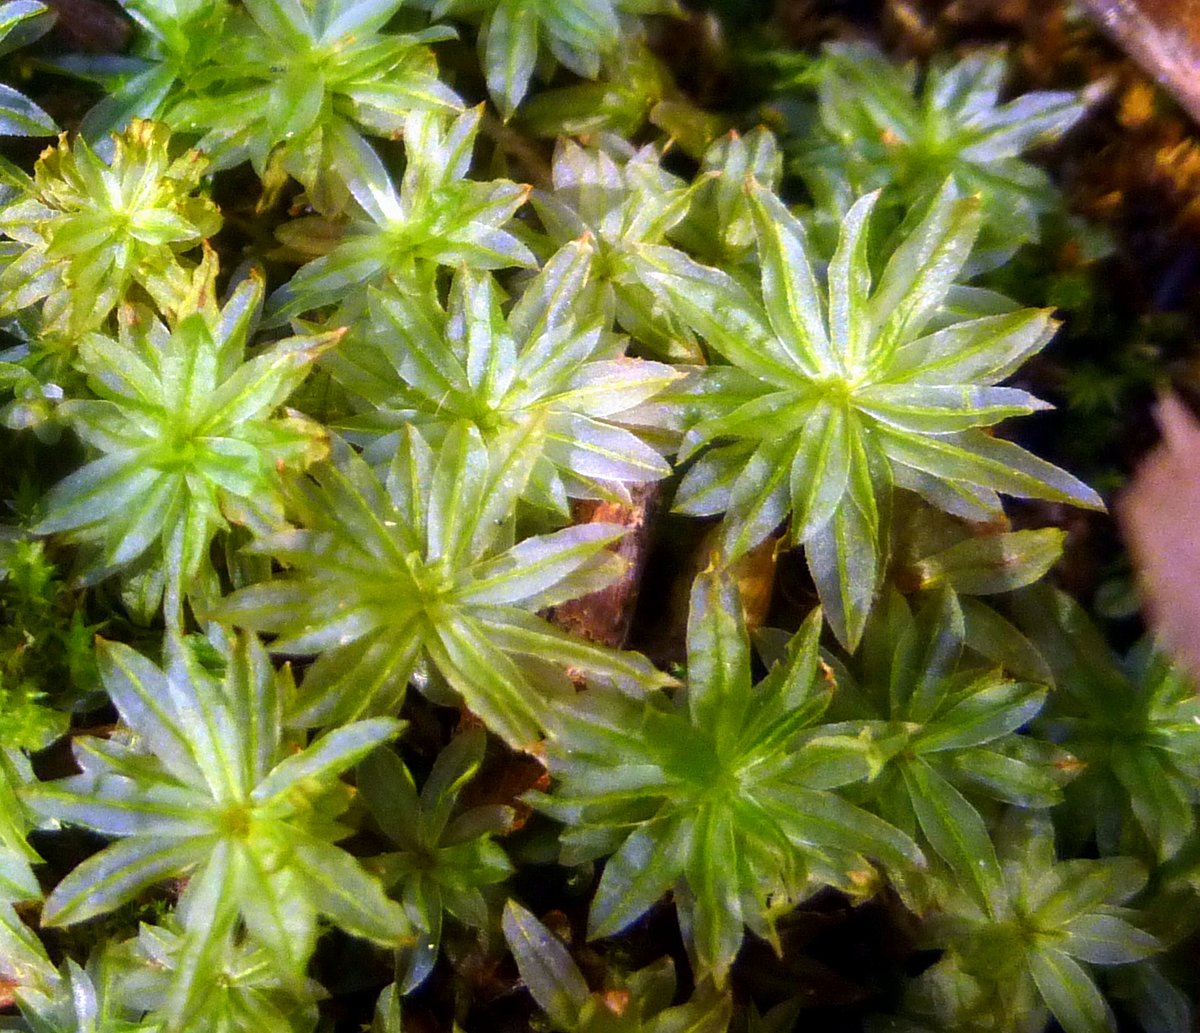 15. Bordered Thyme Moss